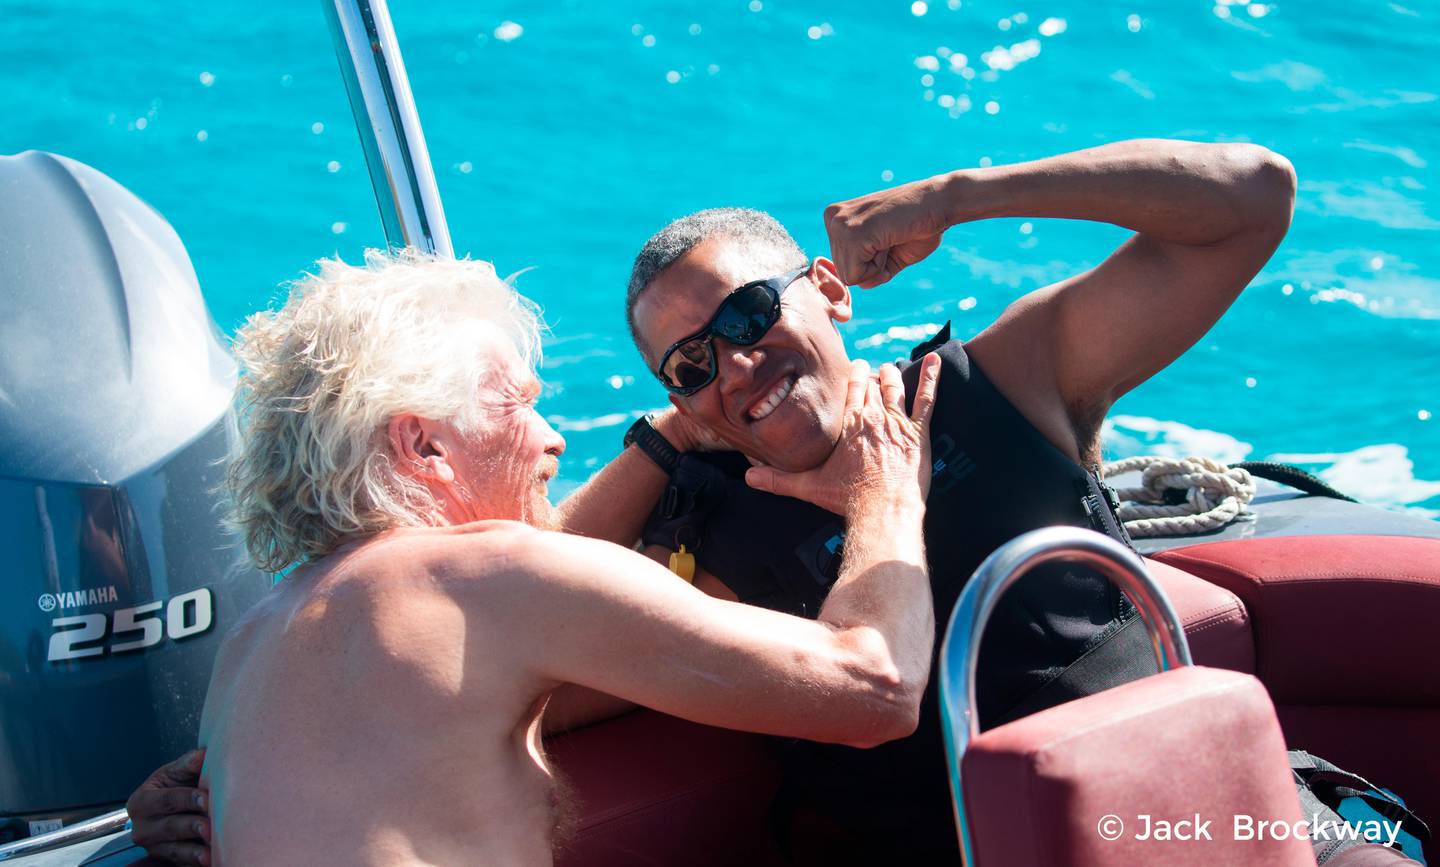 In this recent but undated photo made available by Virgin.com, former U.S President Barack Obama, jokes with Richard Branson, founder of the Virgin Group, during his stay on Moskito Island, British Virgin Islands. The former president and his wife stayed on Mosikto Island owned by Richard Branson, founder of the Virgin Group, after he finished his second term as President and left the White House. (Jack Brockway/Virgin.com via AP)